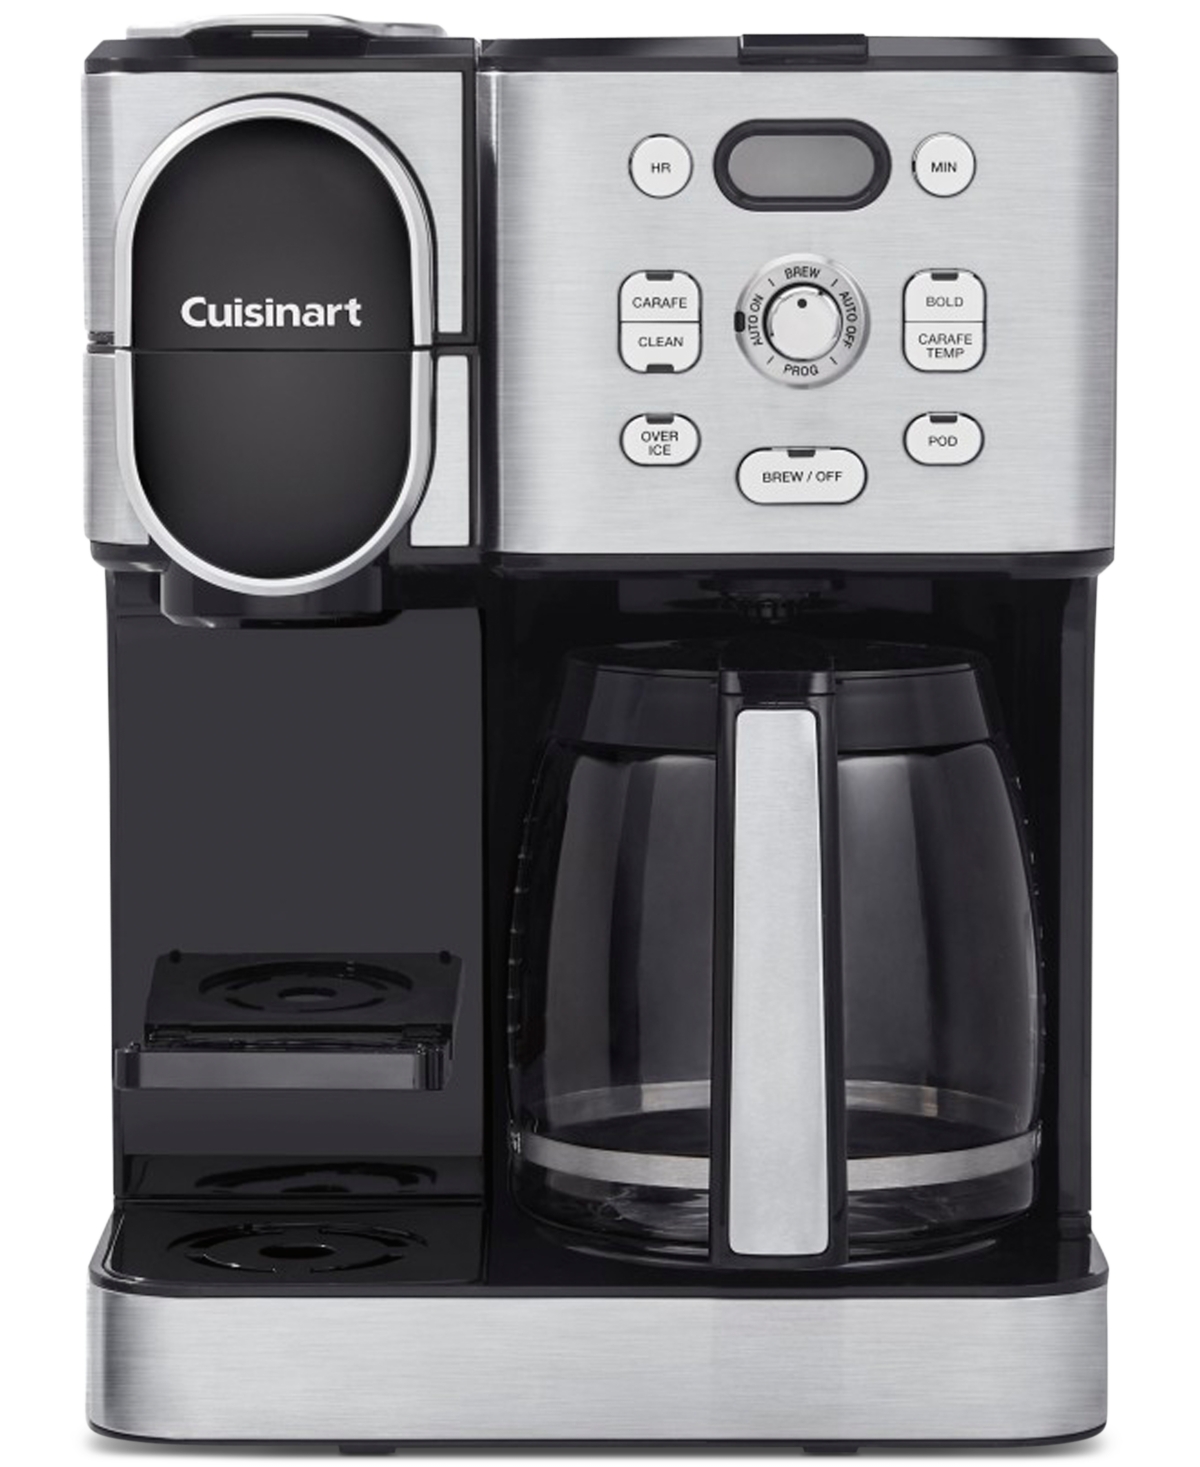 Cuisinart Coffee Center 2-in-1 12-cup Drip Coffeemaker In Stainless